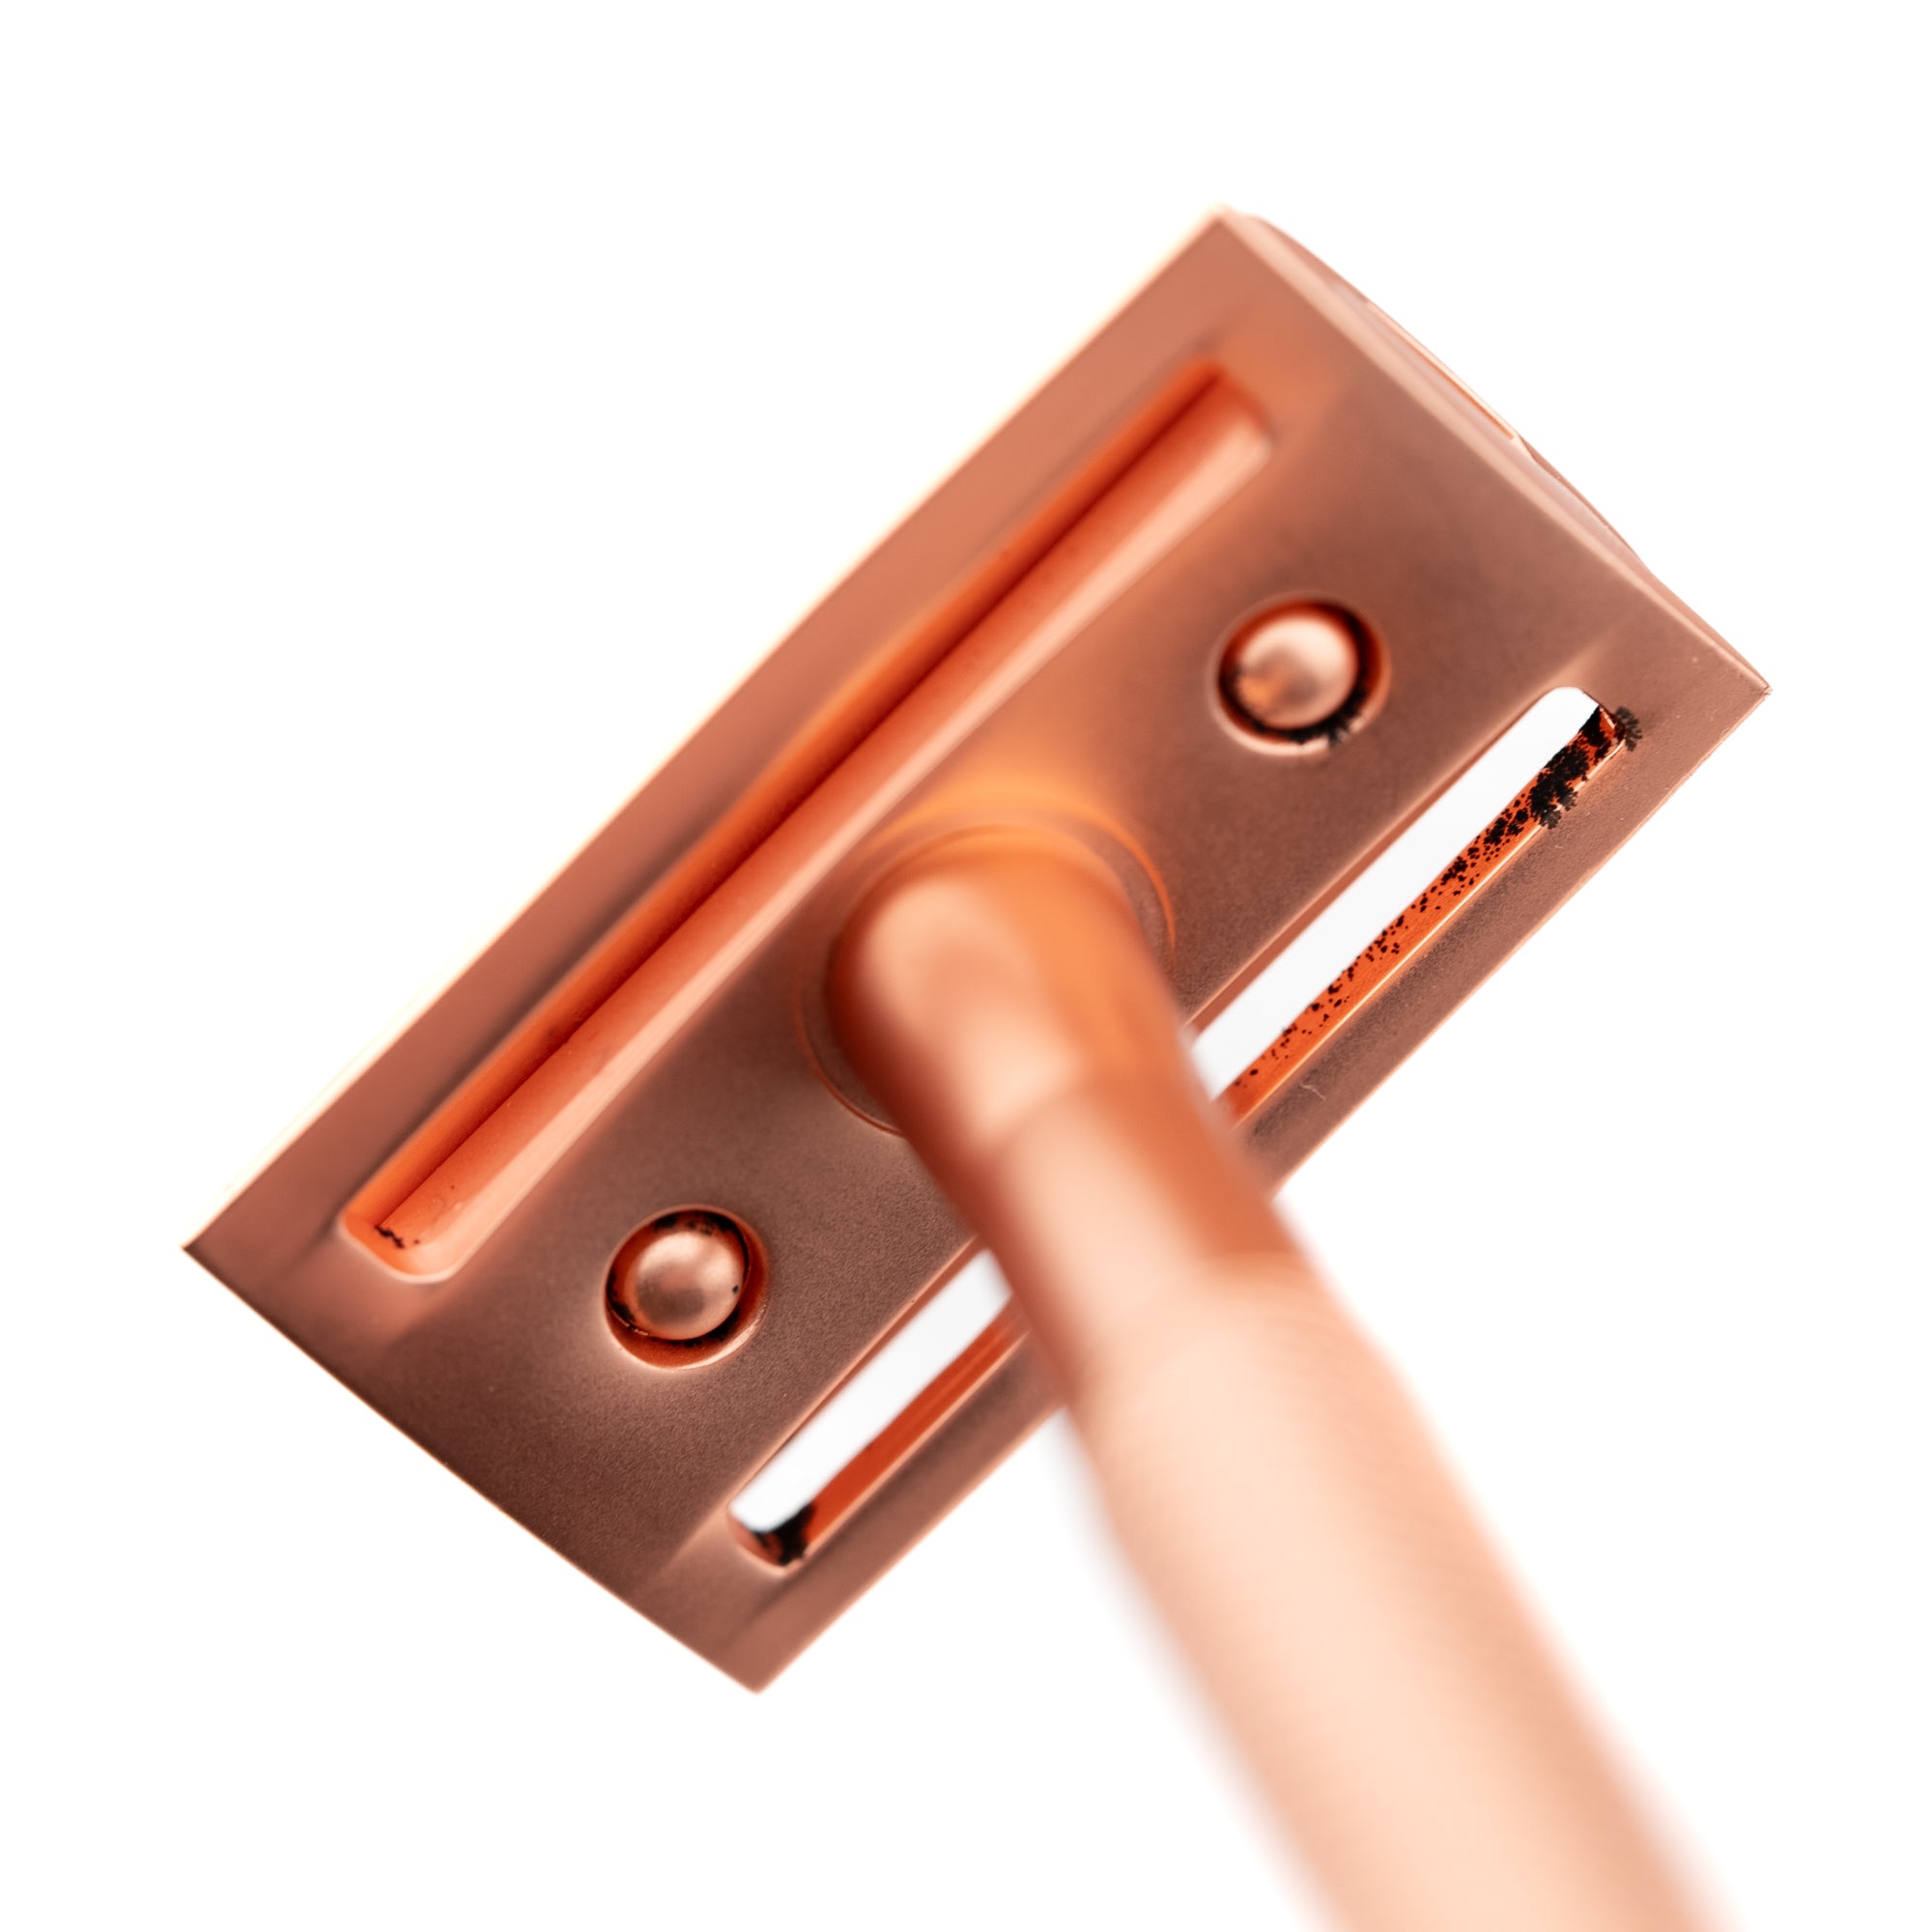 Less Than Perfect Hoxton Shave Co. Rose Gold DE Safety Razor